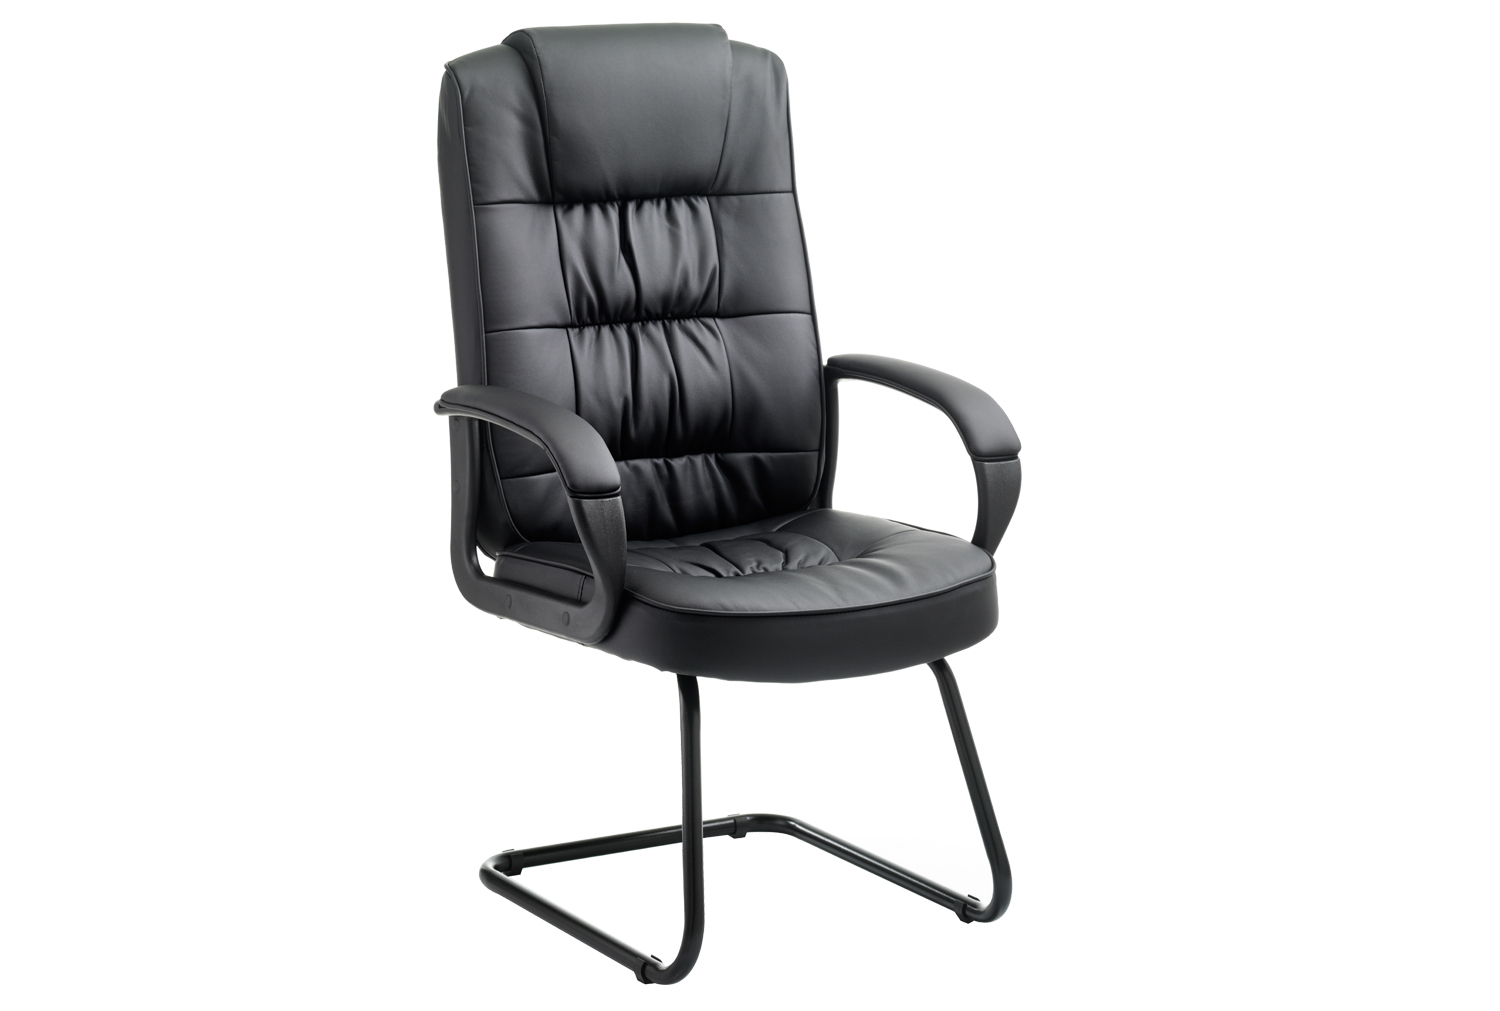 Muscat Leather Faced Visitor Office Chair, Black, Express Delivery